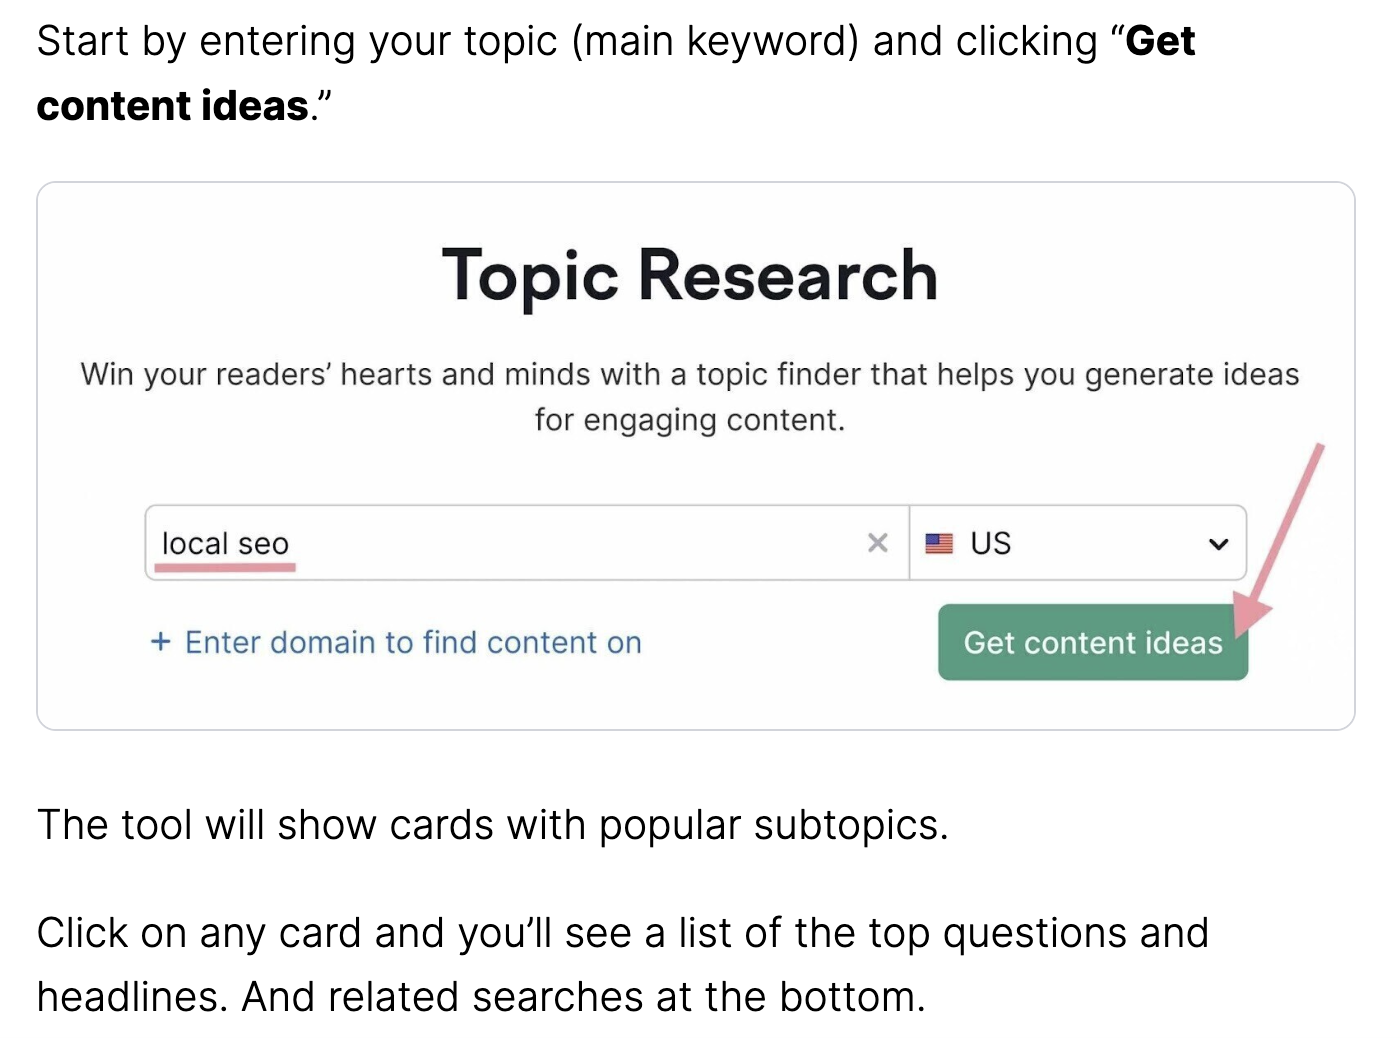 A section with more descriptions and images with workflow for "Topic Research" tool